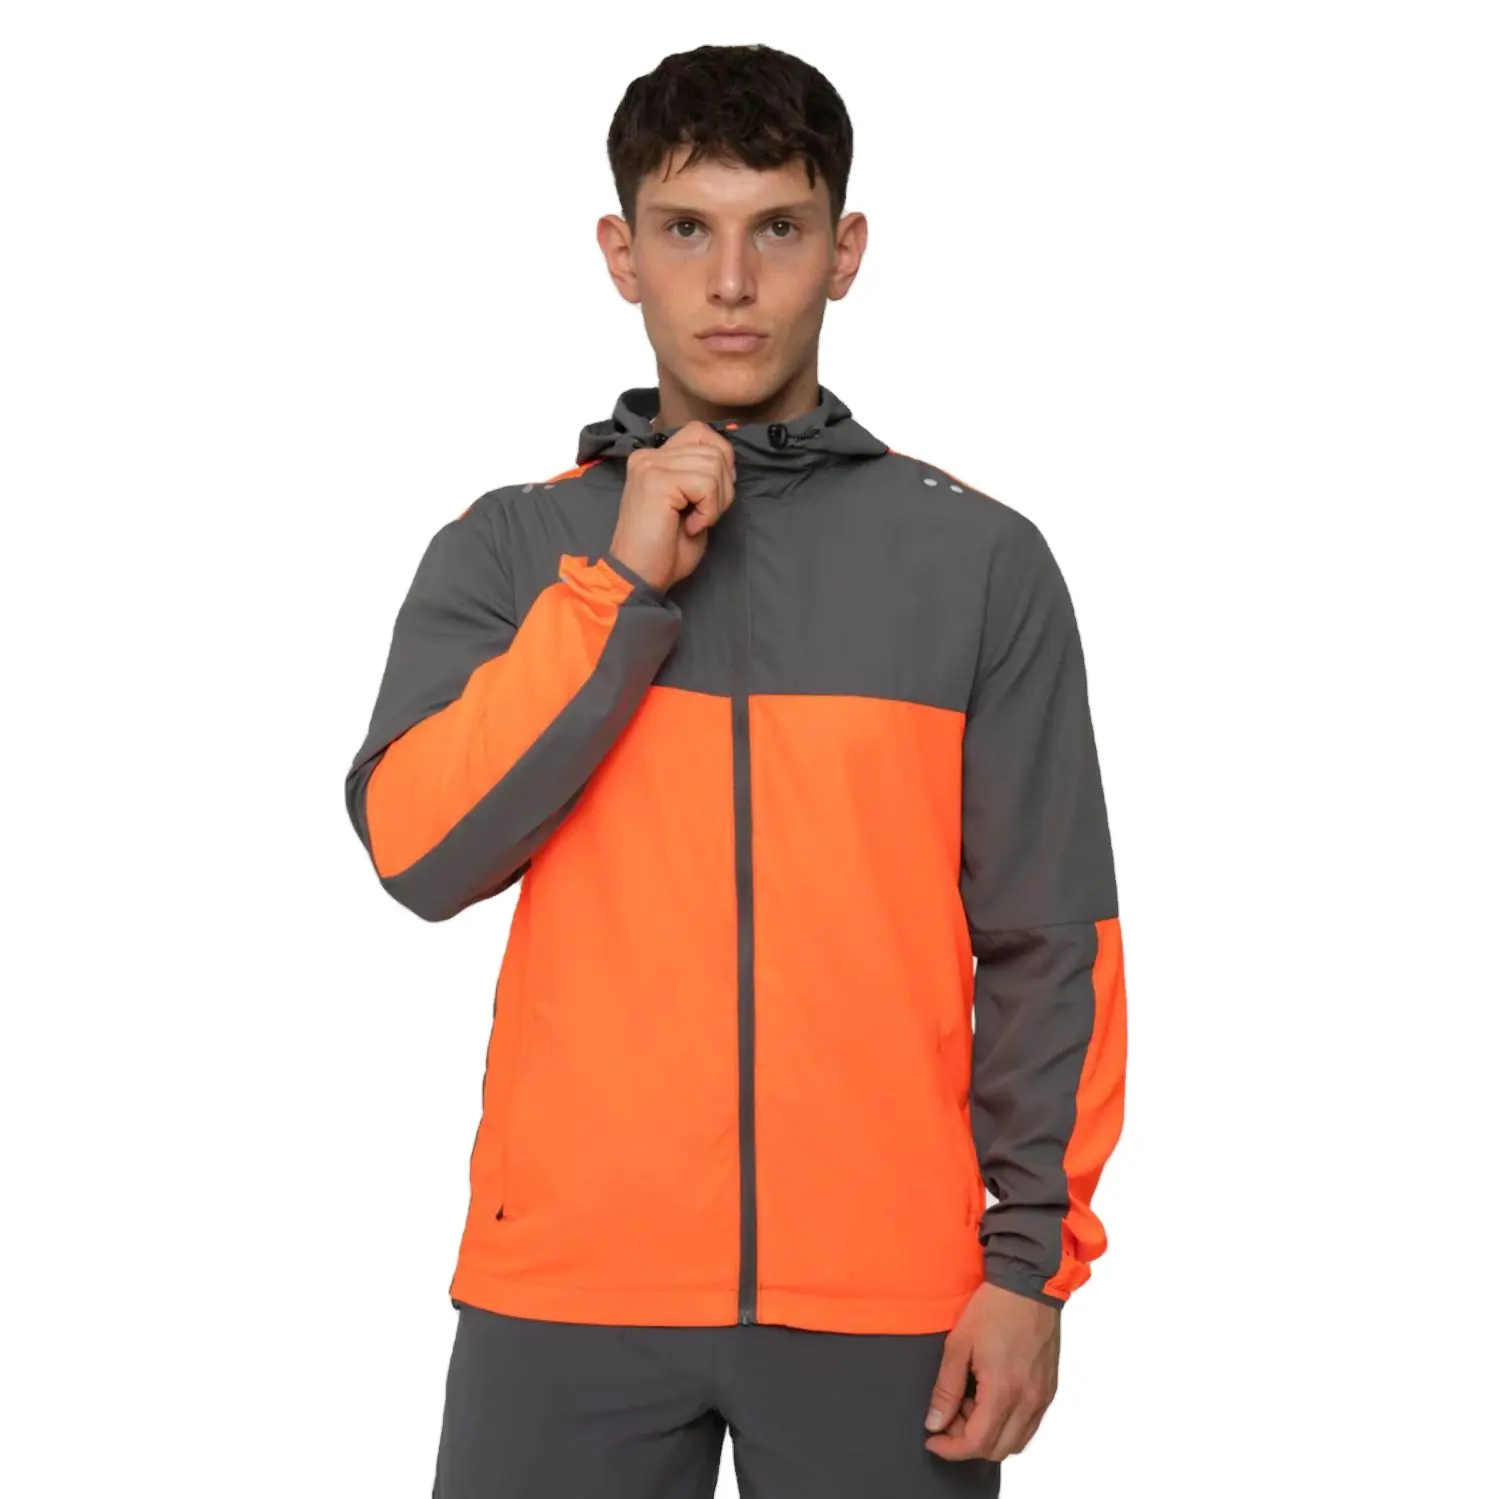 2022 Men's Fashionable Casual Windbreaker Jacket Windproof and Heated for Hot Spring-Autumn Slim Stand Outwear Coat